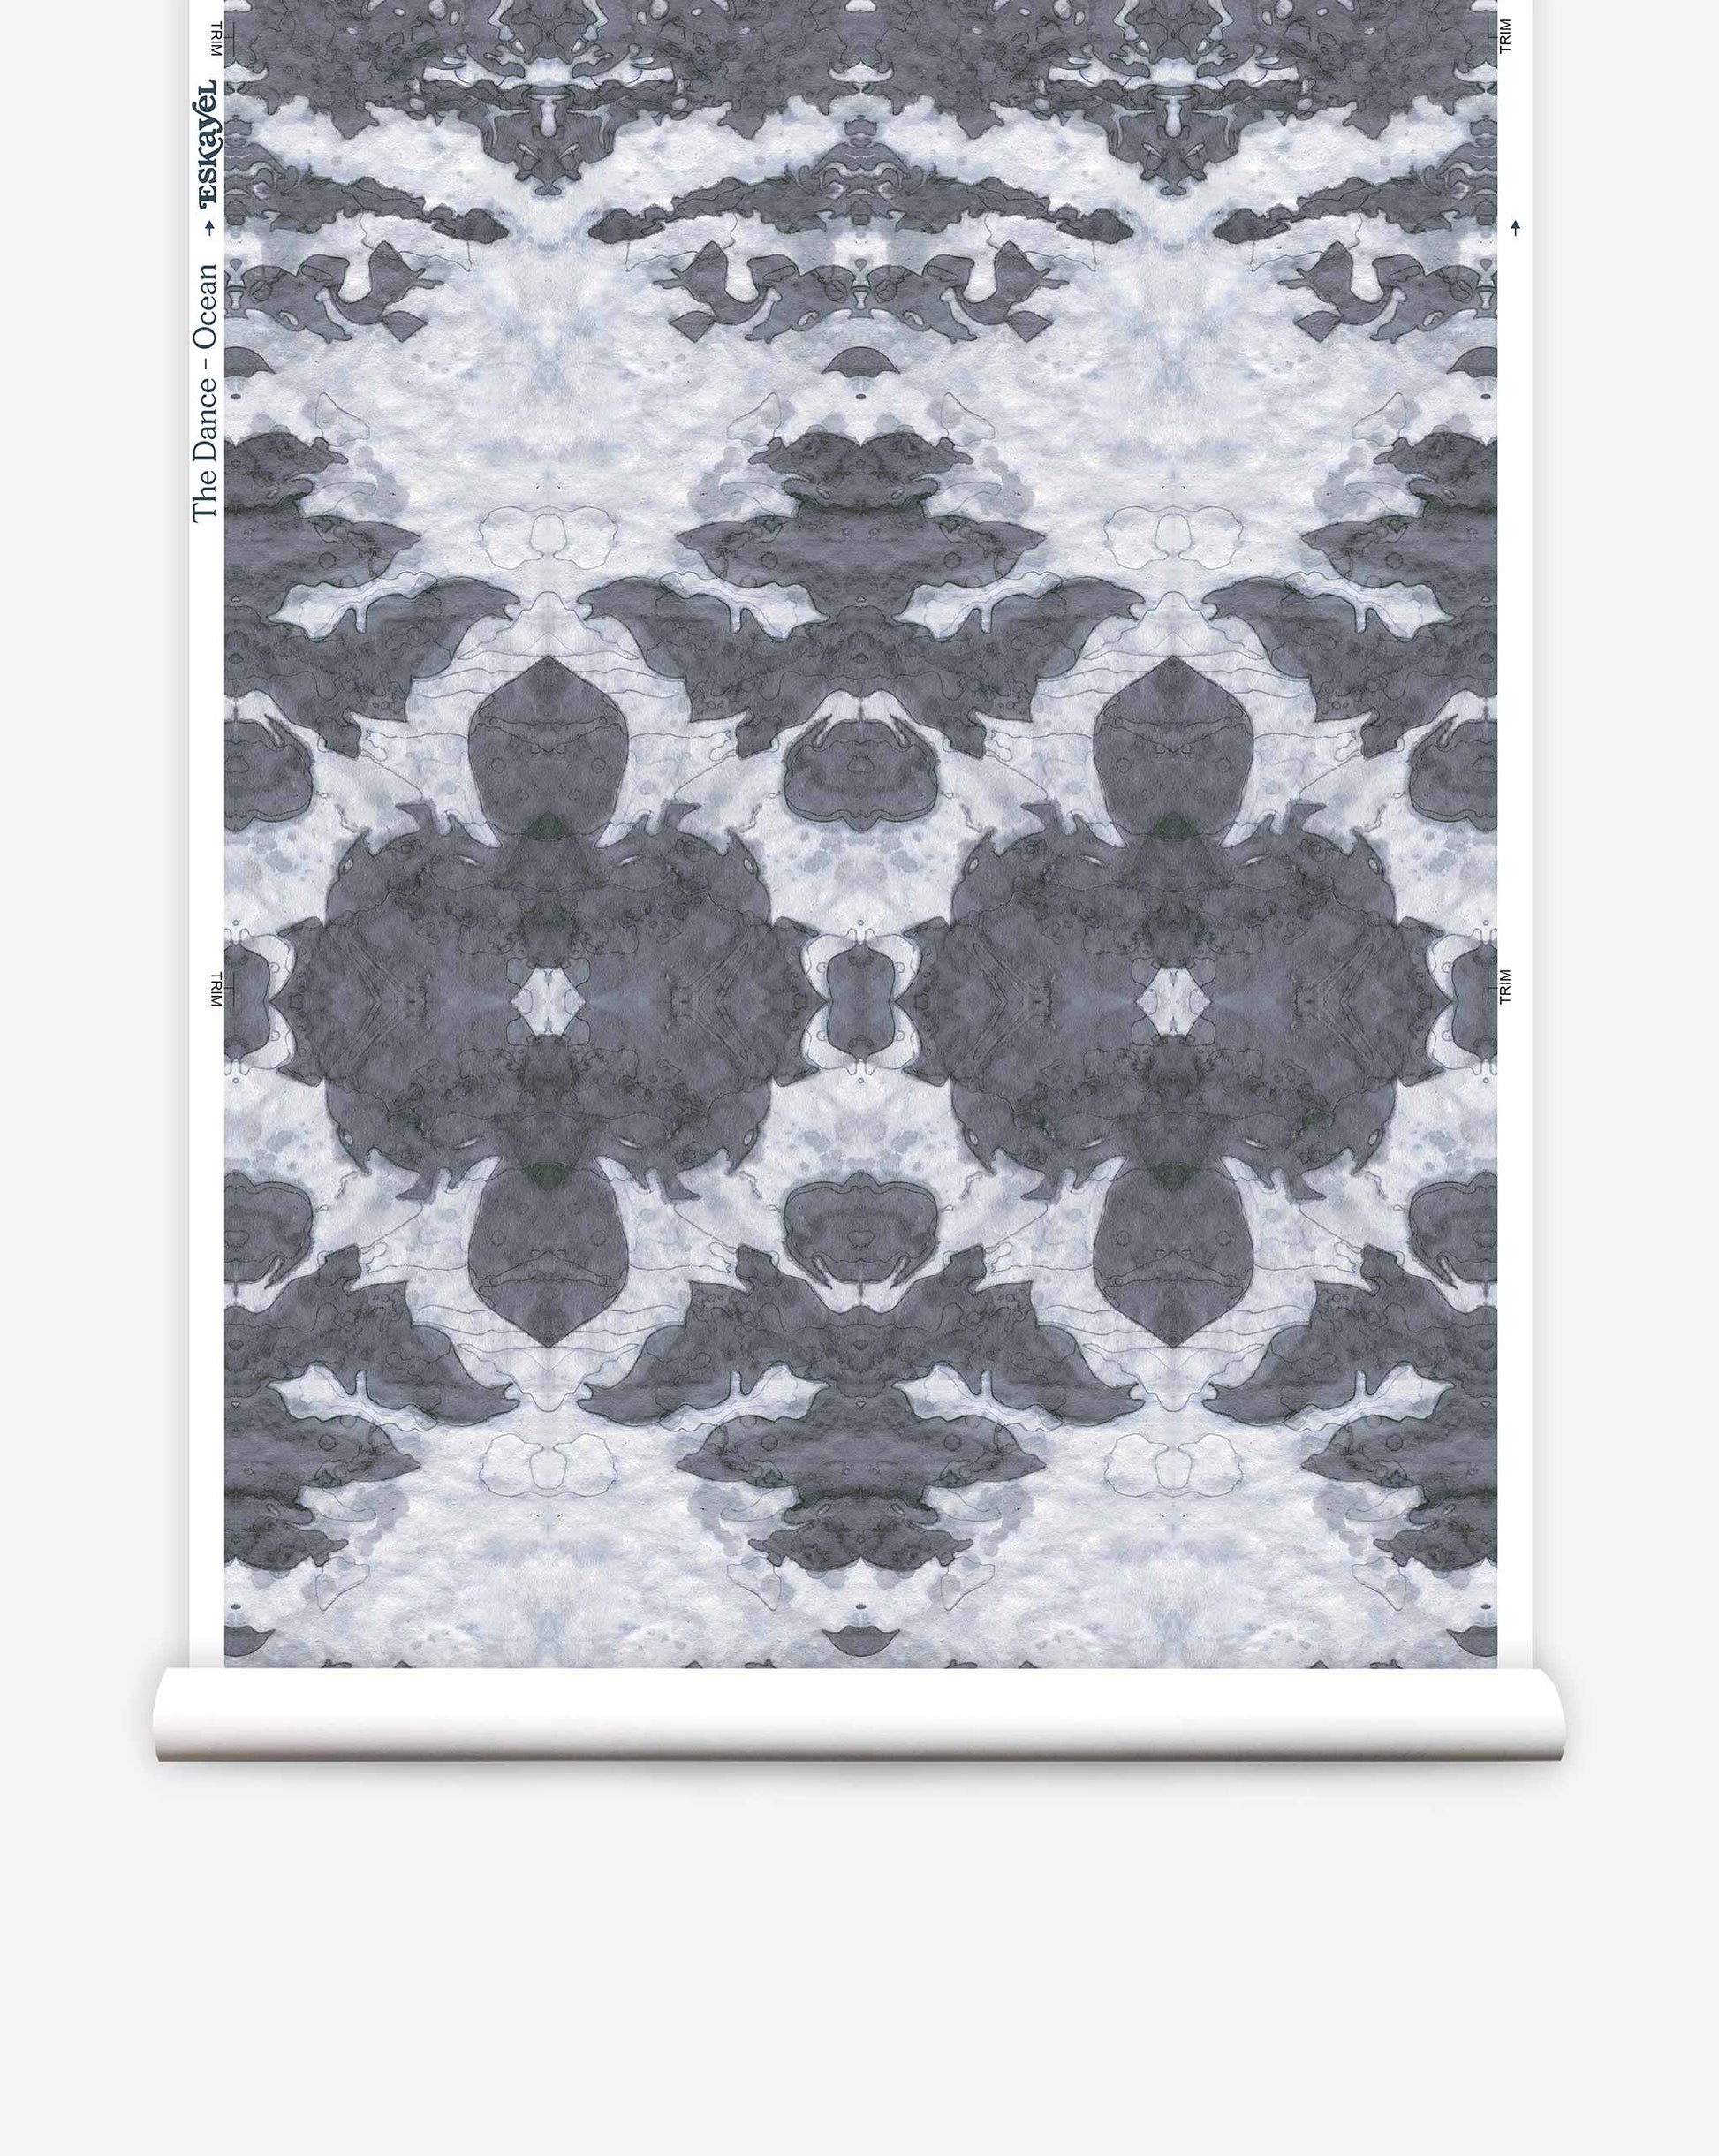 Symmetrical abstract pattern in shades of gray and white resembling cloud formations from the The Dance Wallpaper||Ocean Collection, displayed on a scroll-like canvas.